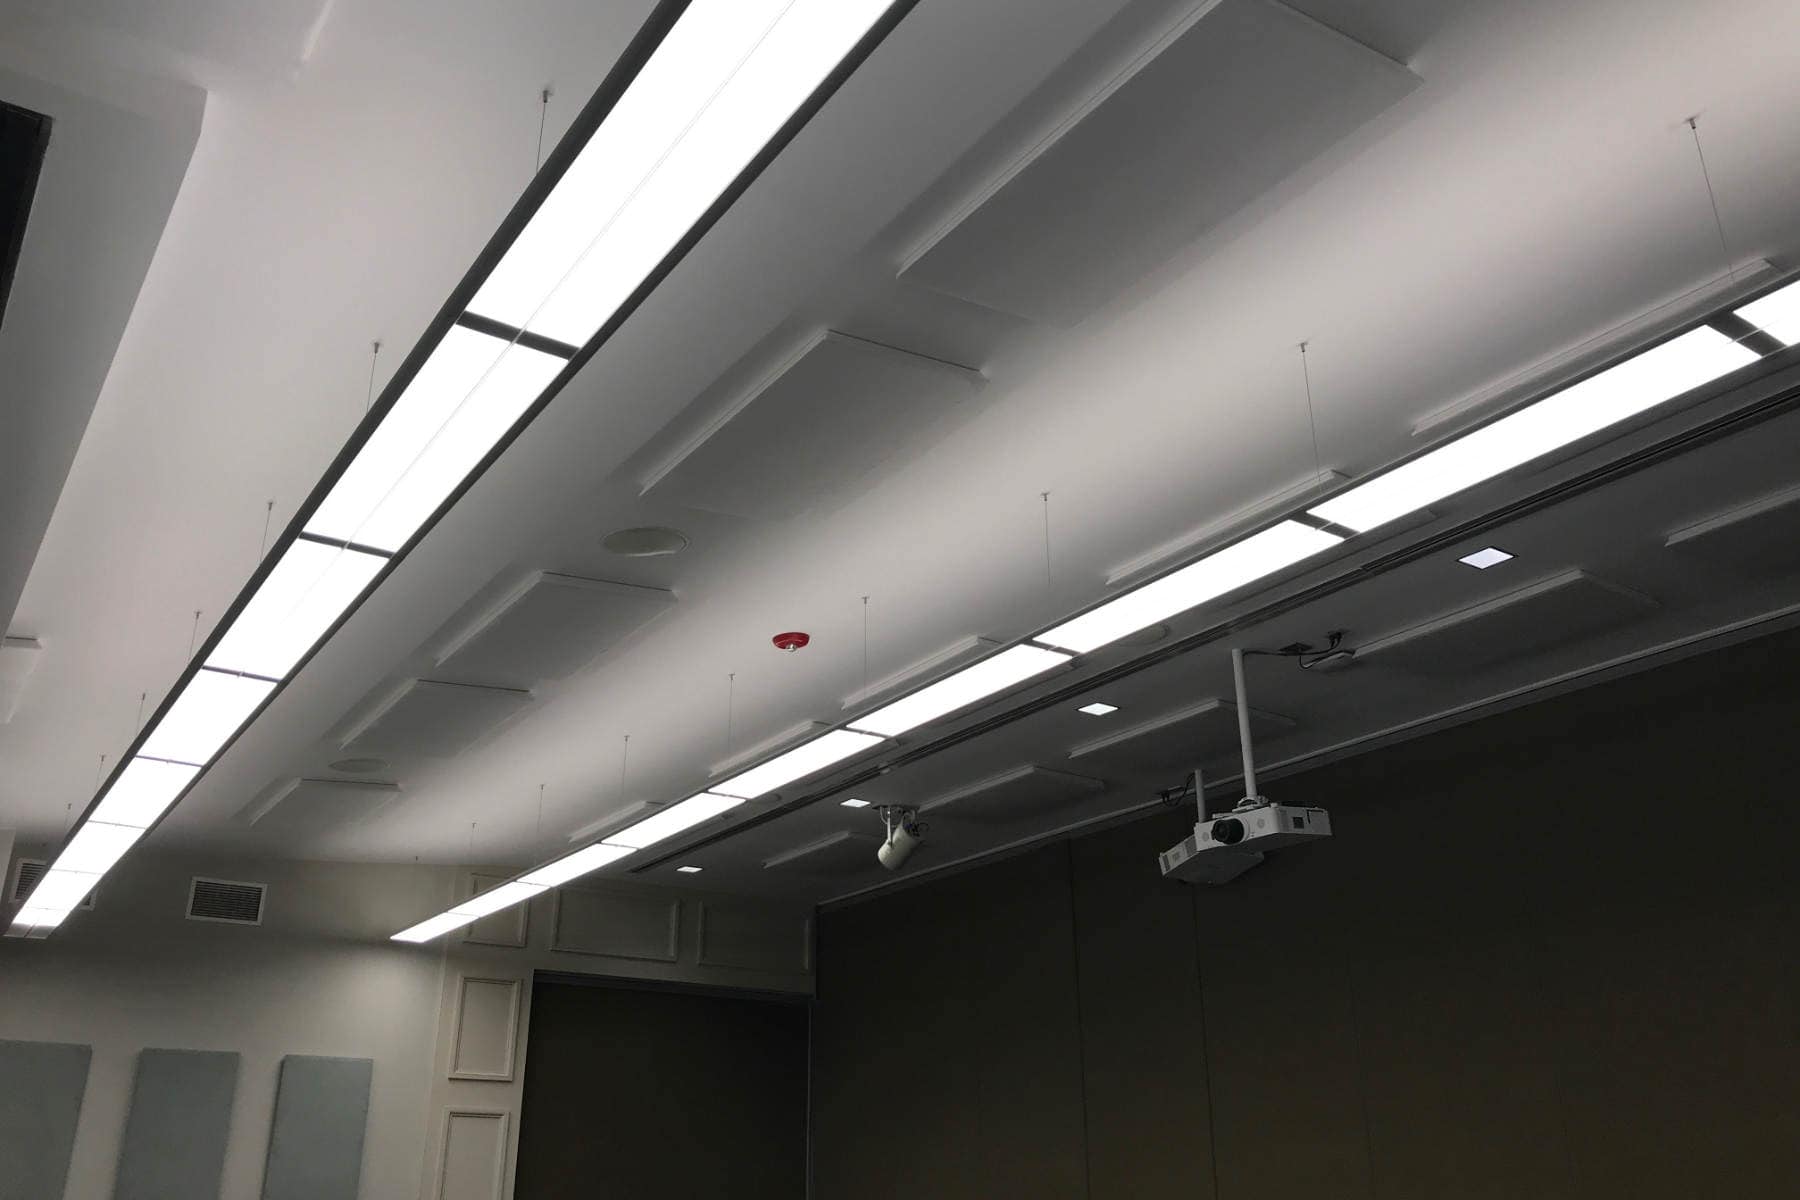 WAVEPro acoustic panels on ceiling of library room